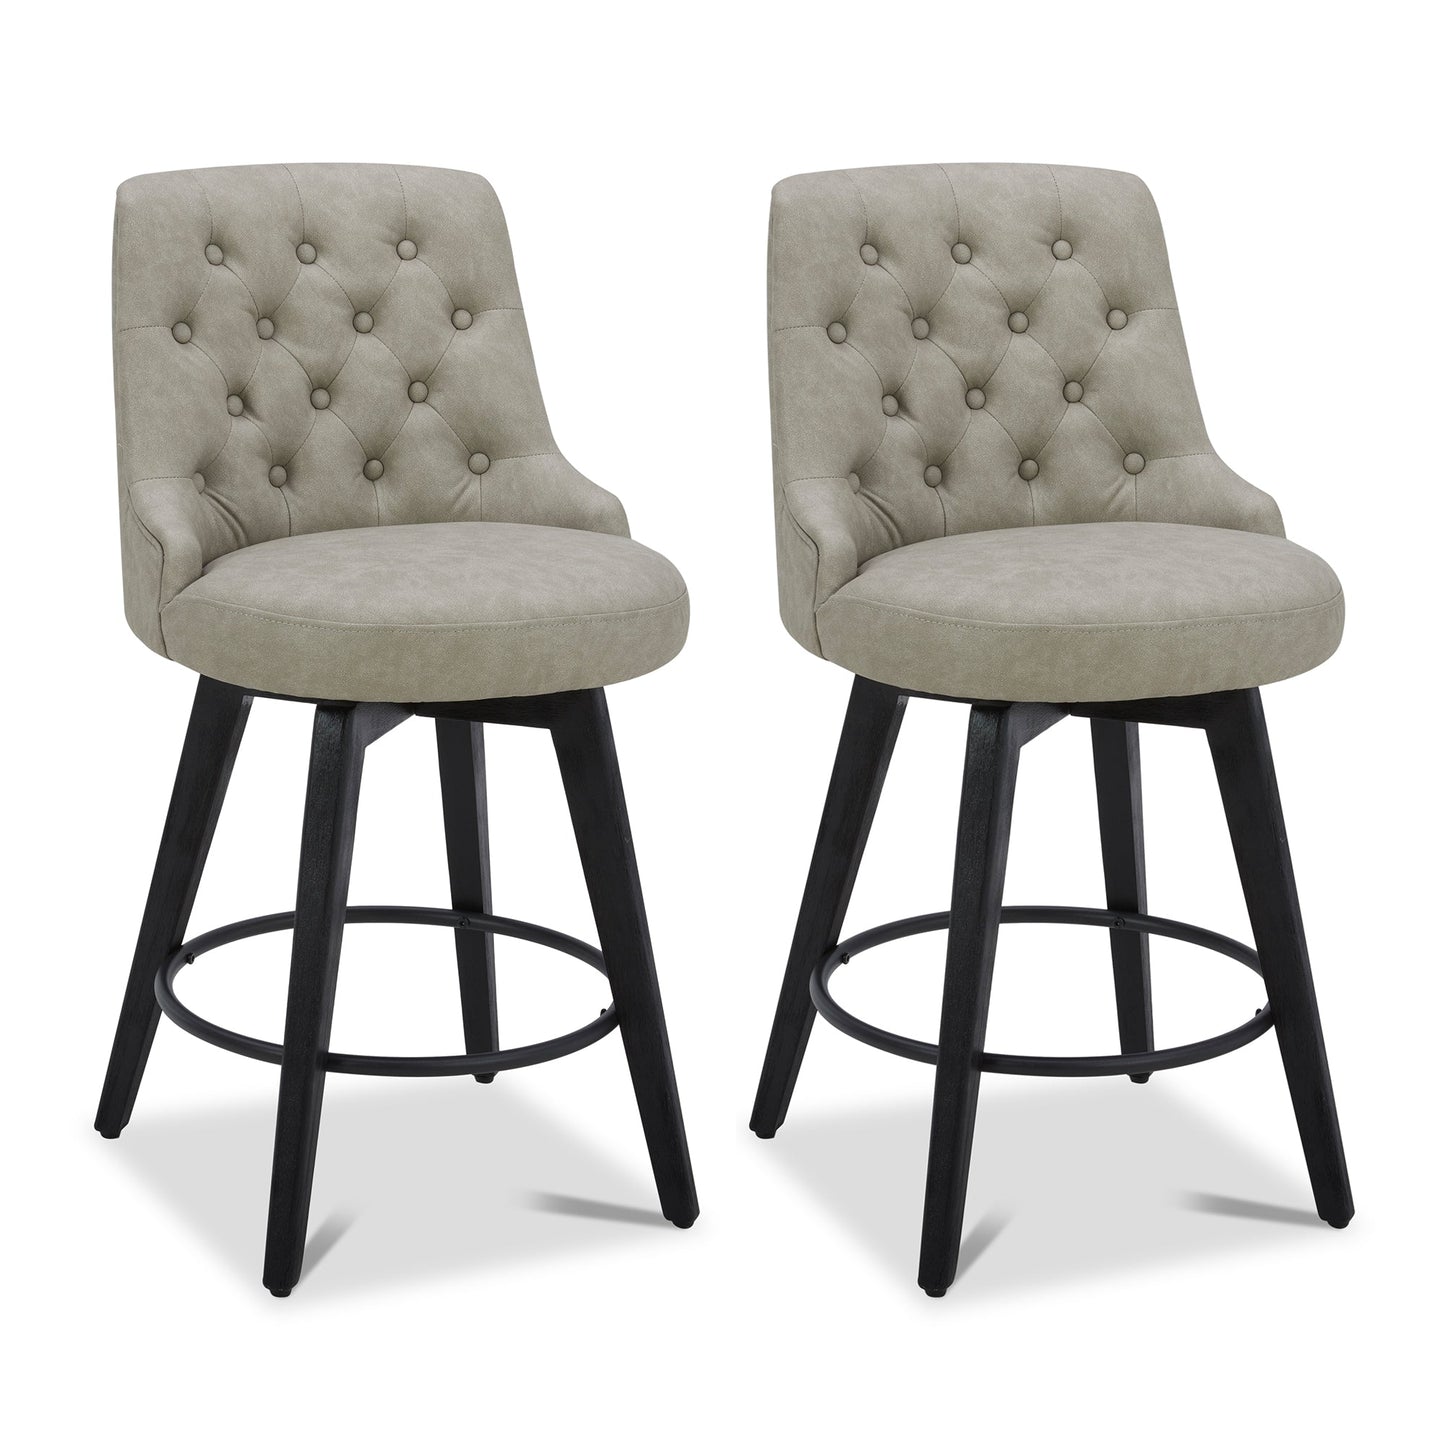 CHITA LIVING-Morgan Prime Tufted Swivel Counter Stool-Counter Stools-Faux Leather-Stone Gray-Set of 2